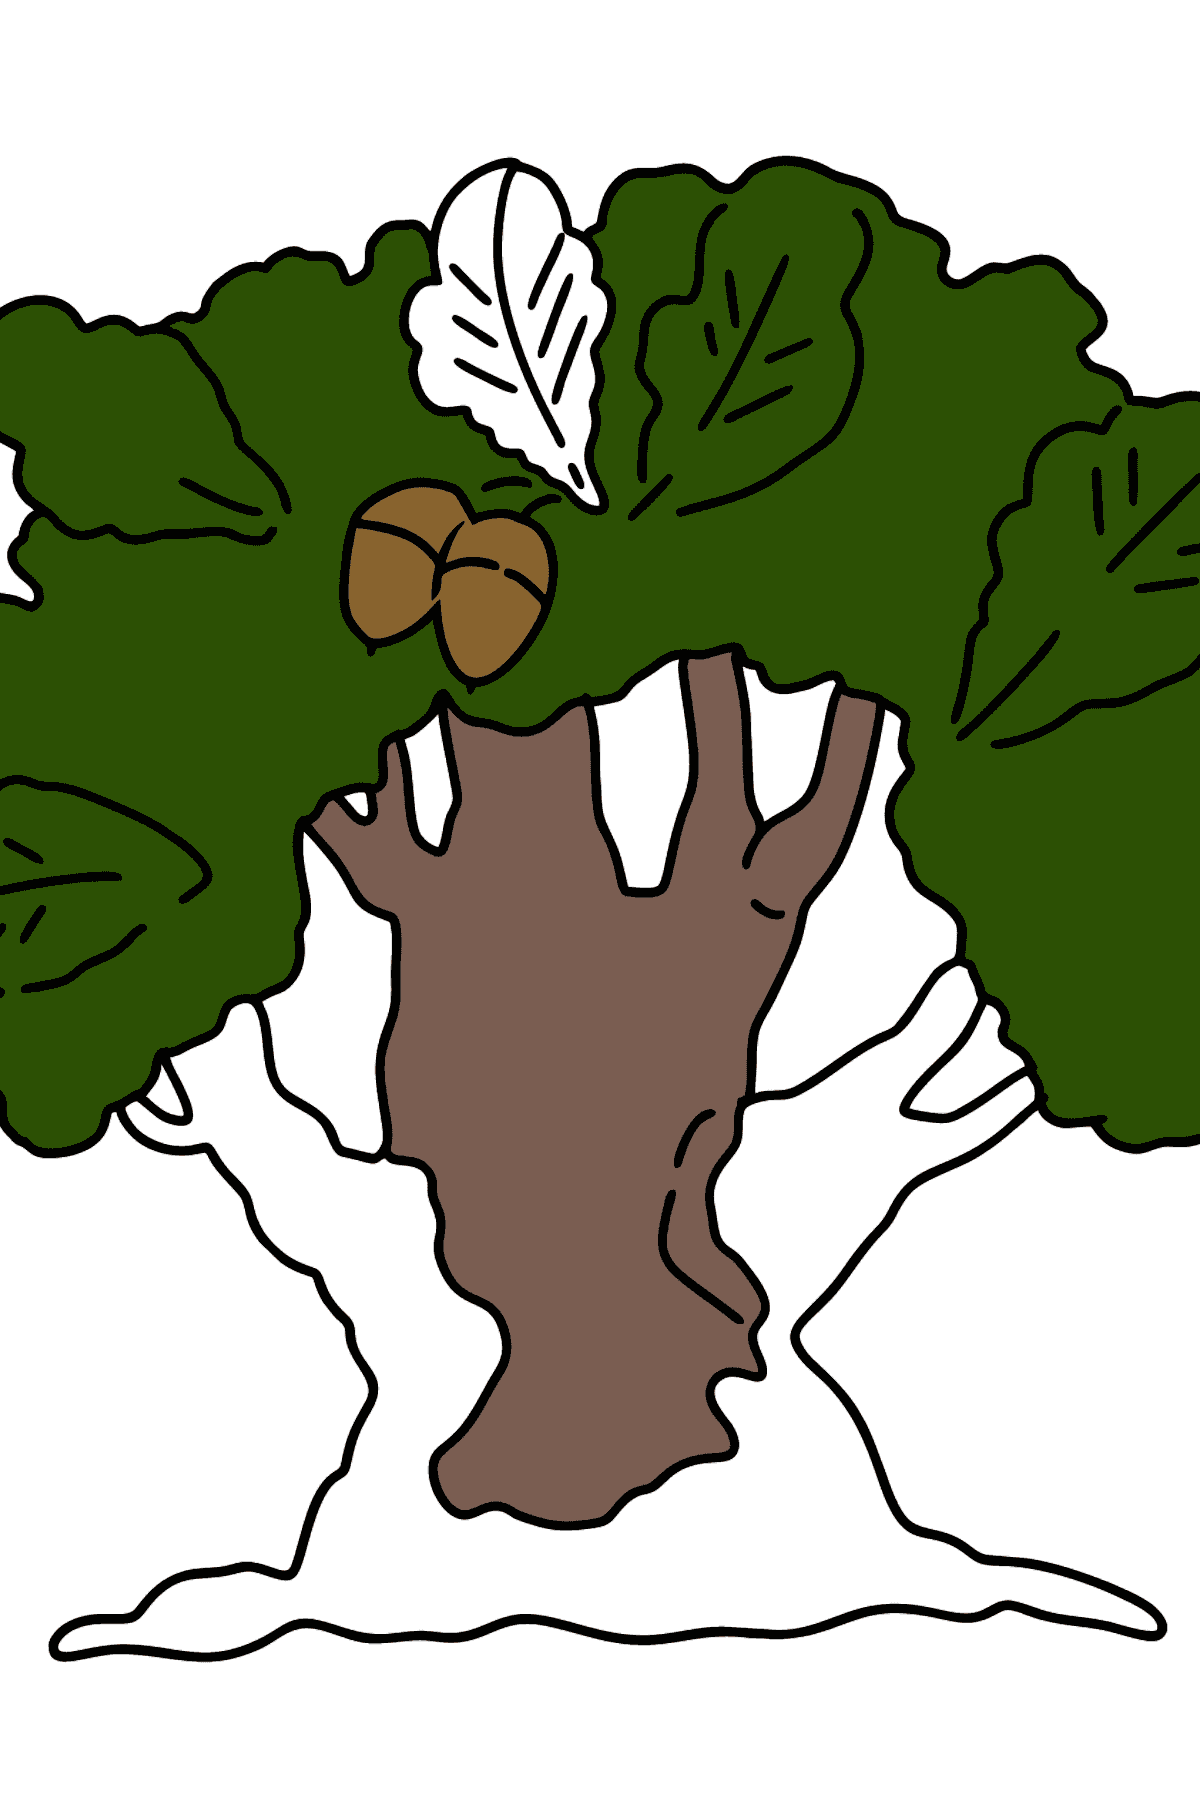 Oak coloring page - Coloring Pages for Kids